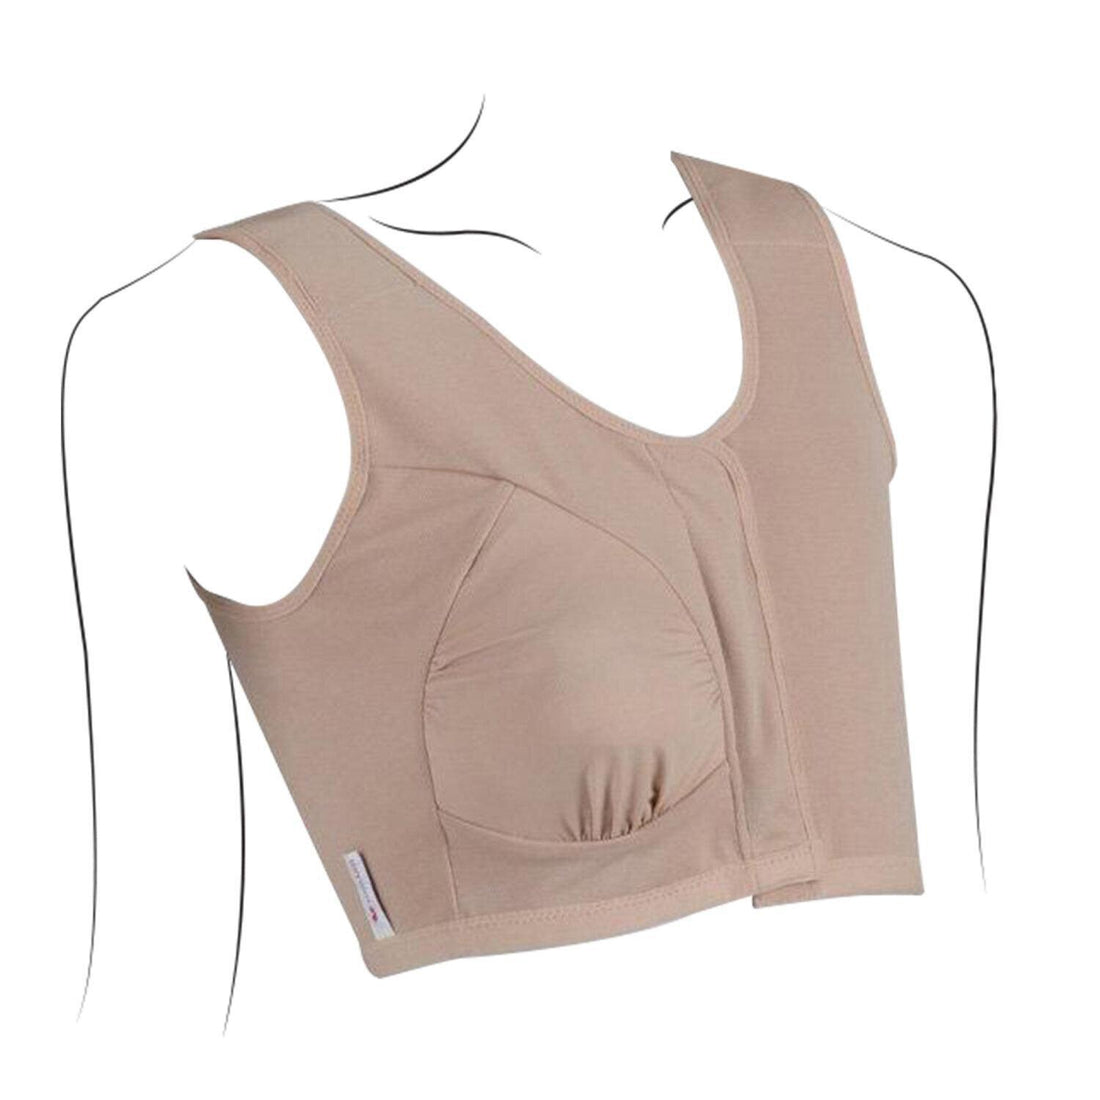 Slimming shirt after breast surgery (unilateral) model WX4304